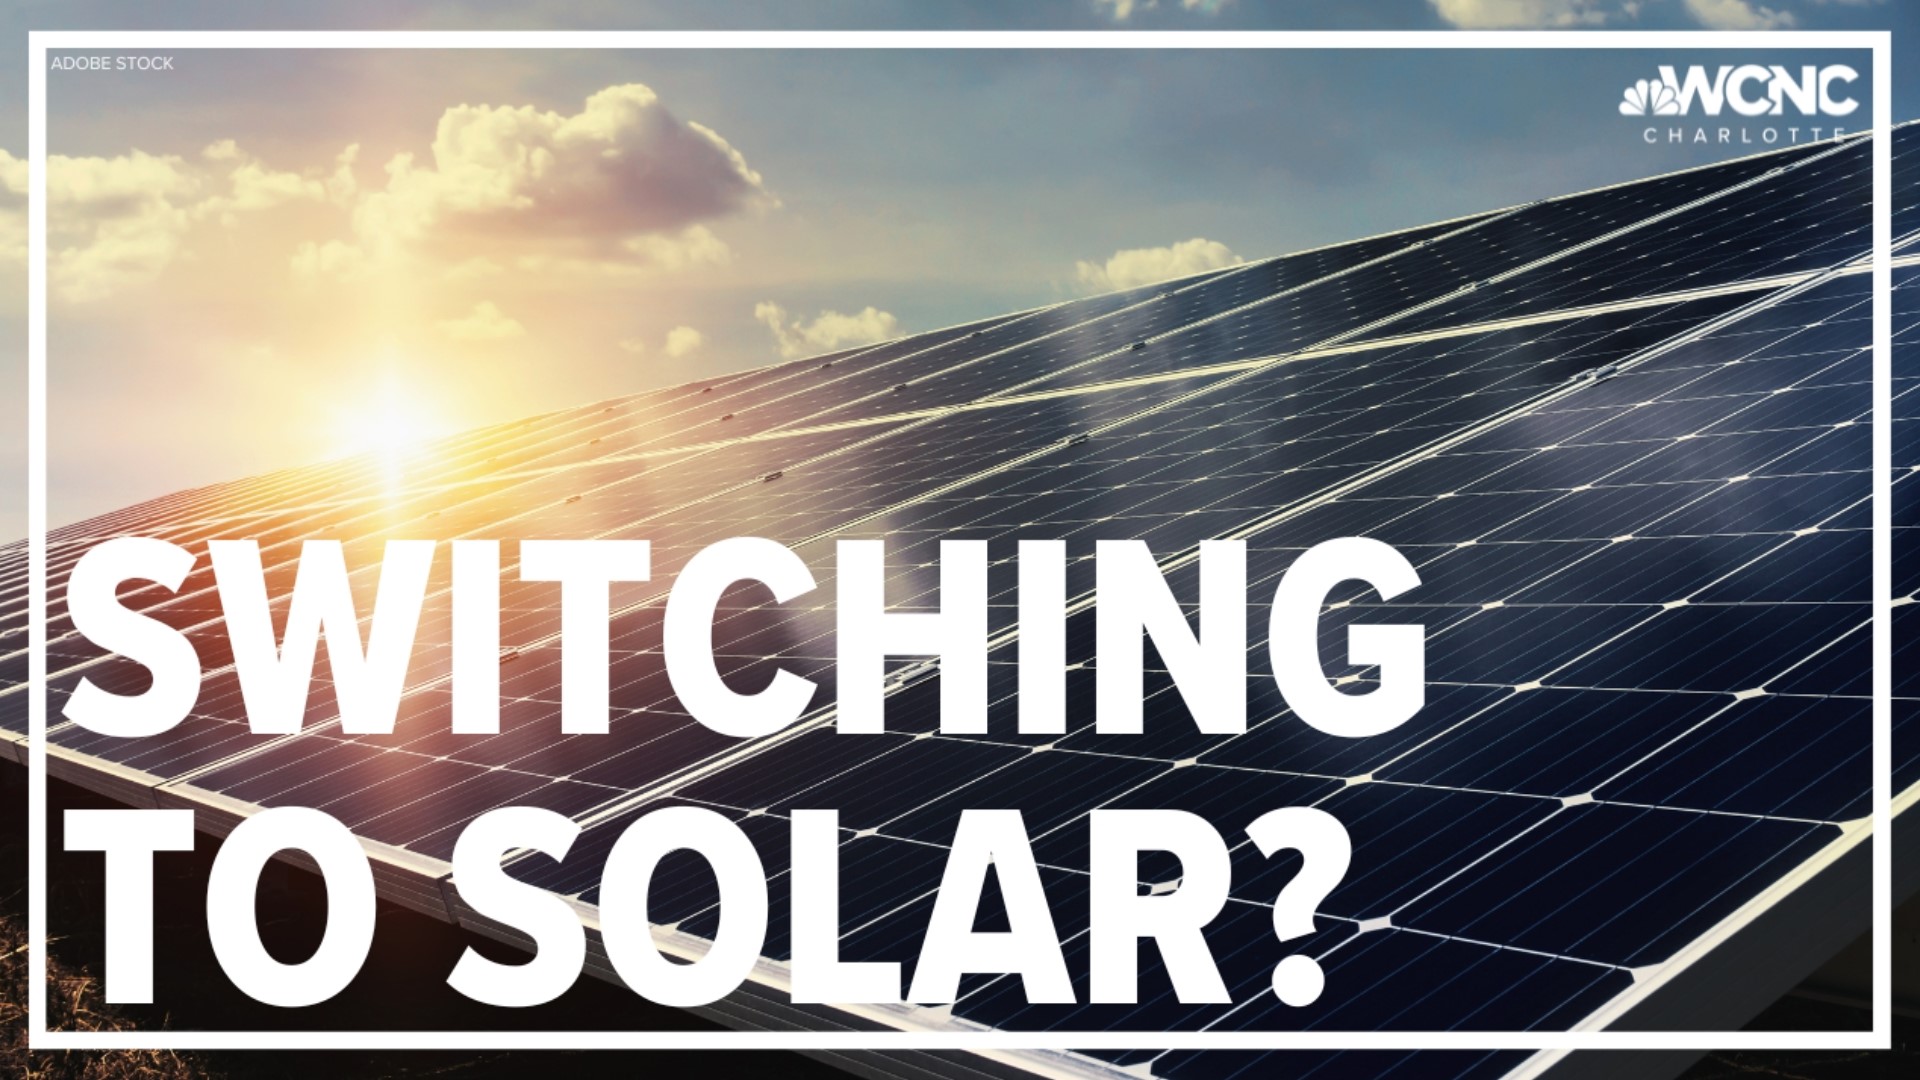 Inflation has everyone looking for ways to save. With rising energy costs, is now the time to switch to solar panels?